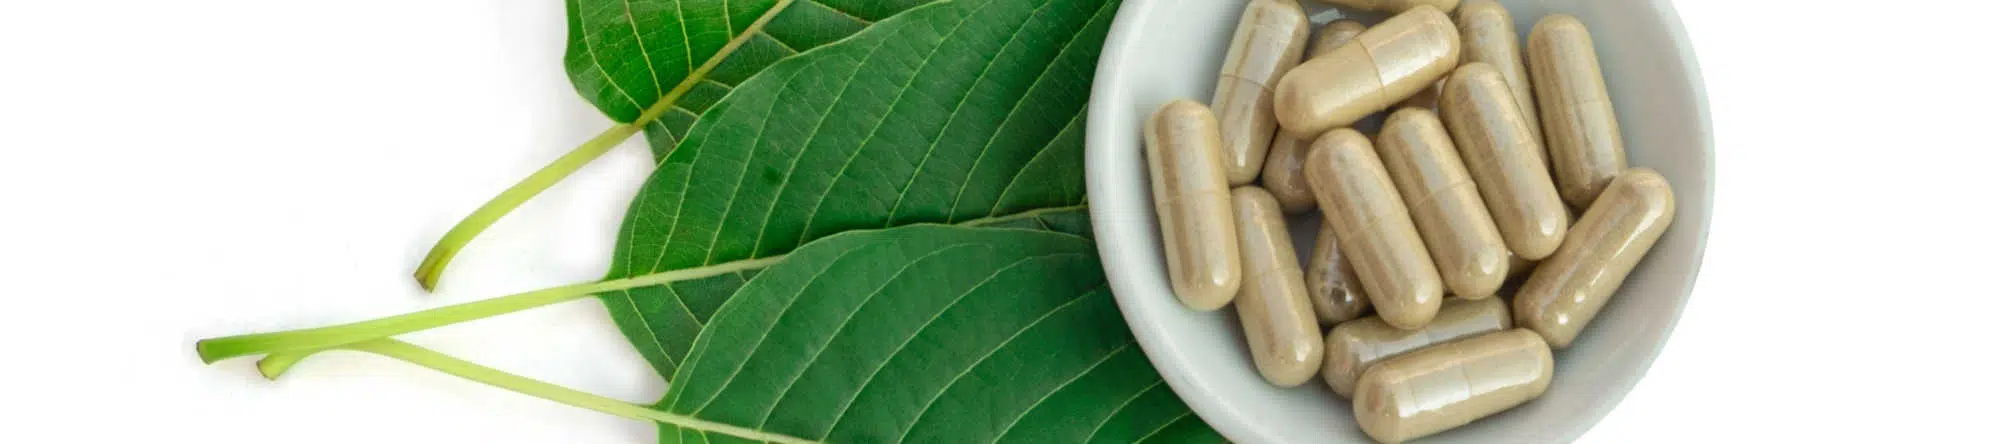 image of kratom leaves and capsules